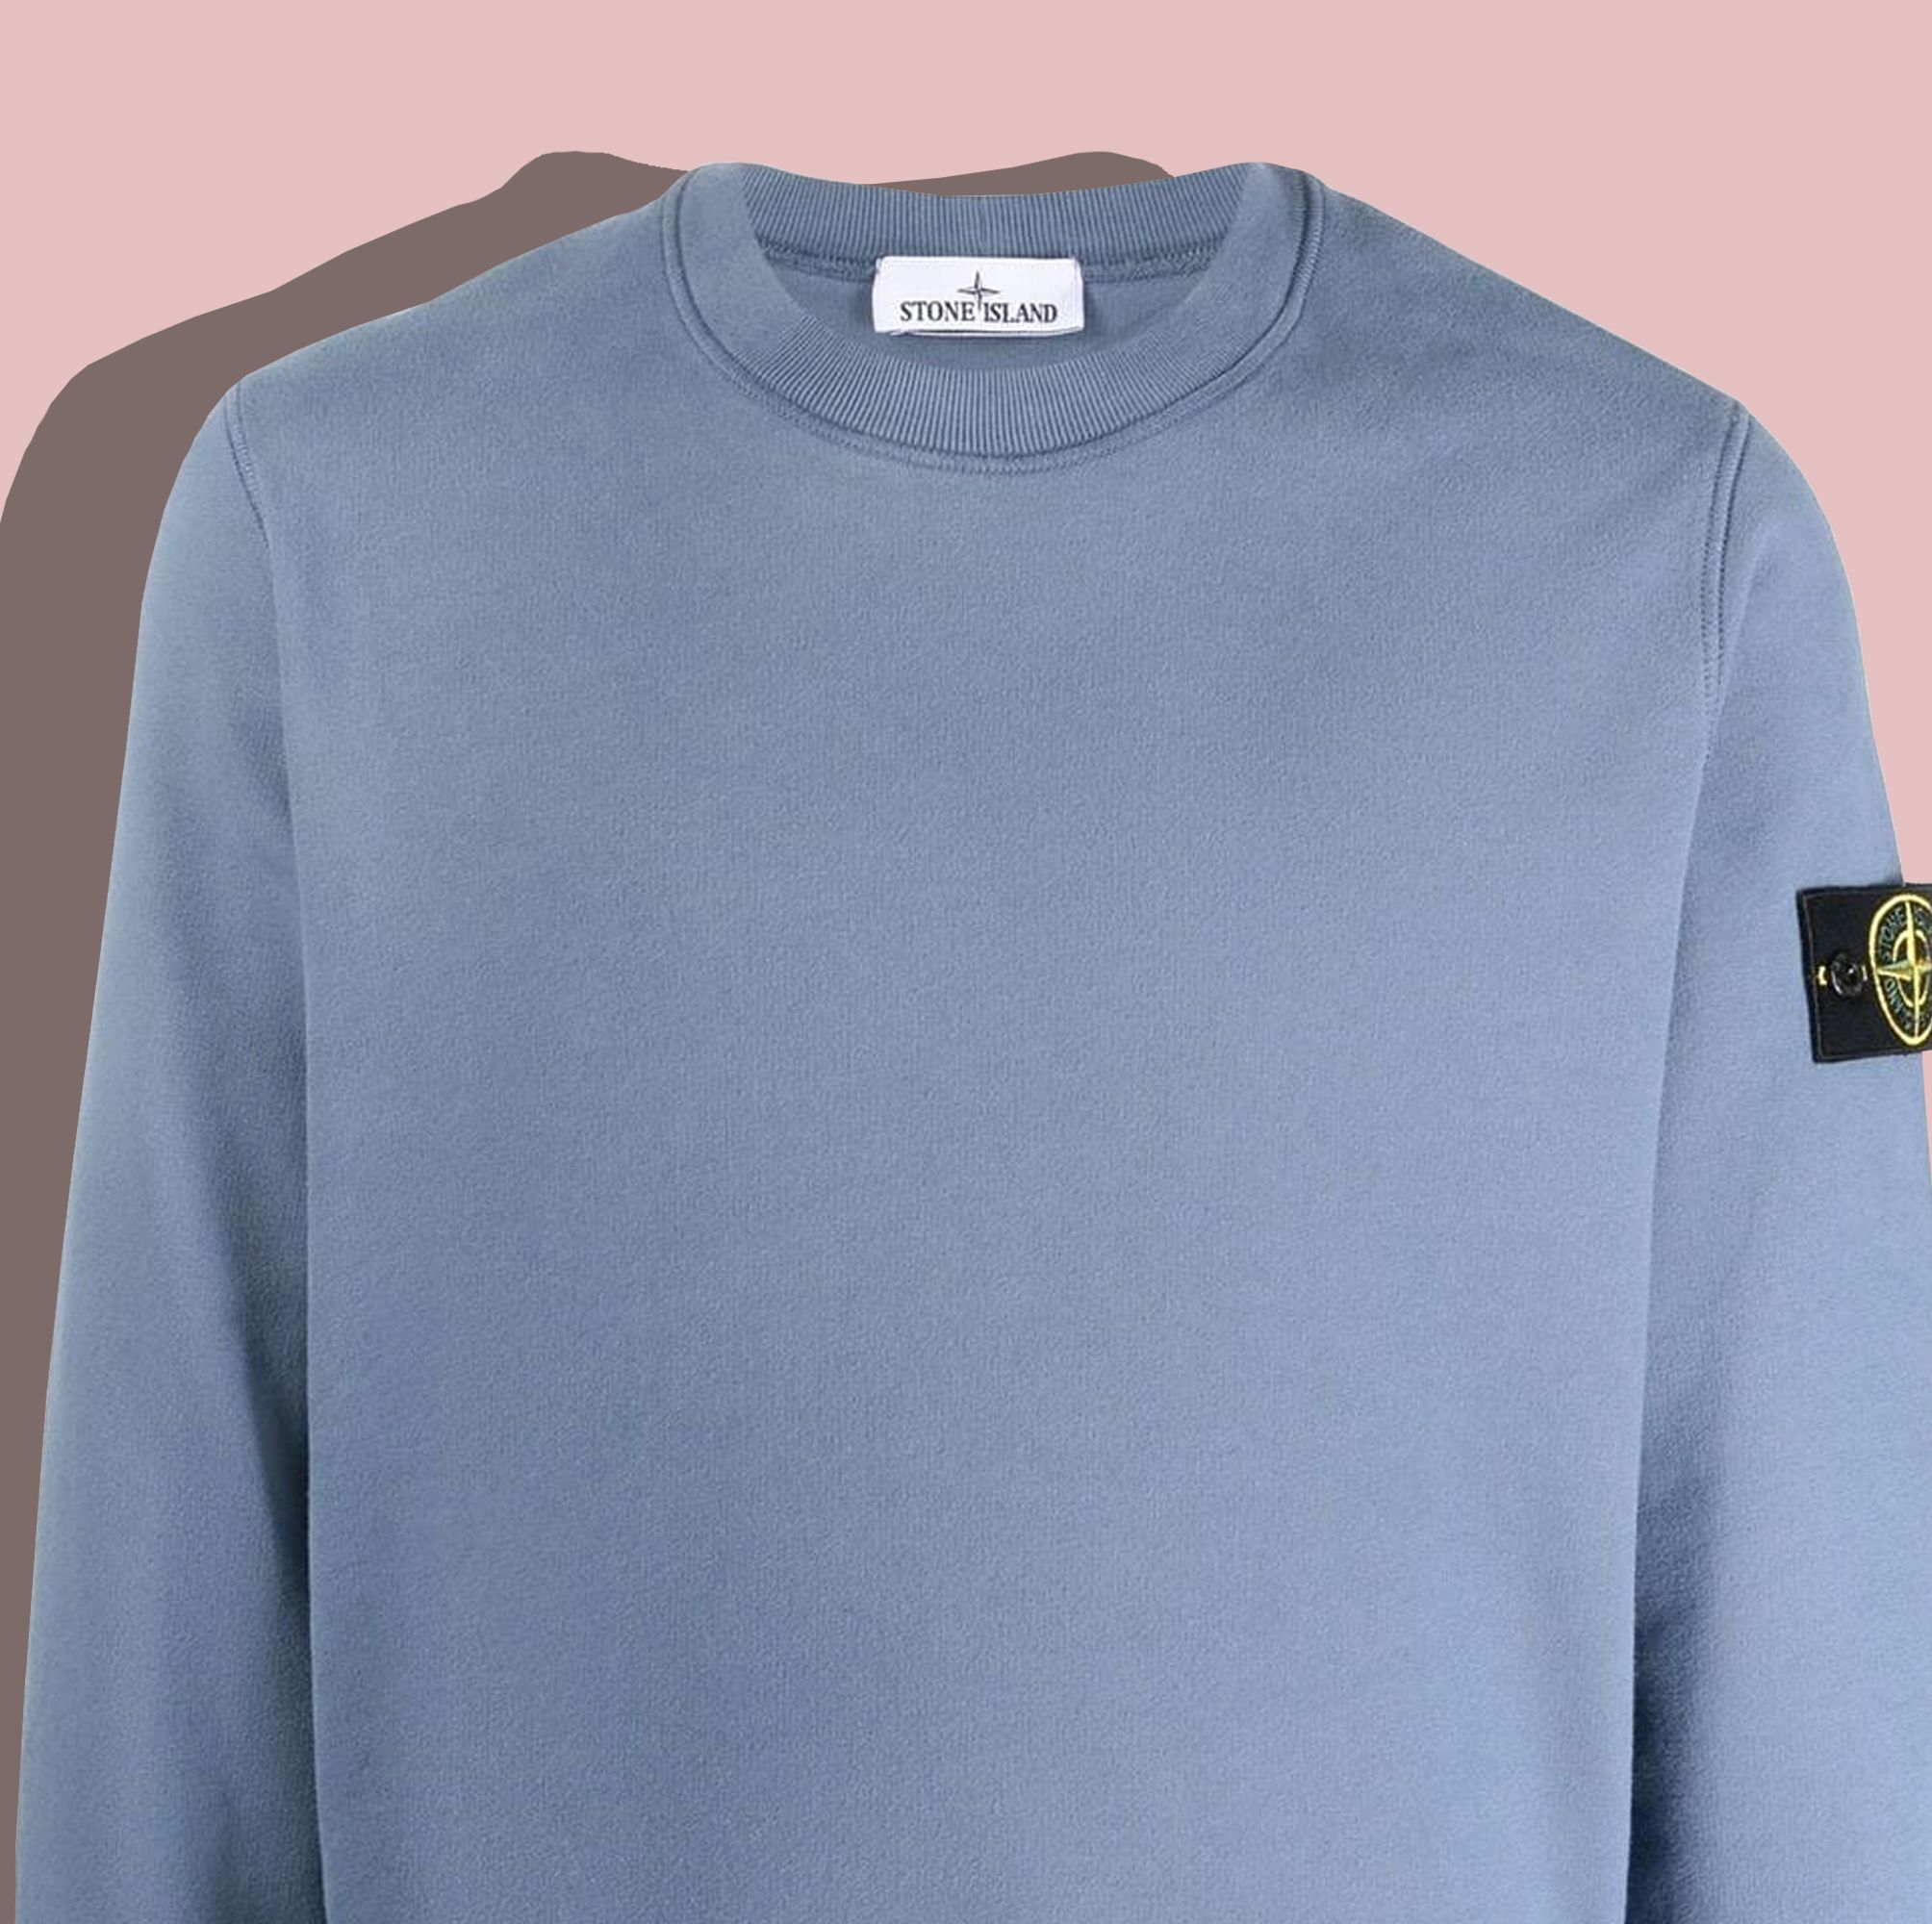 The 22 Best Crewneck Sweatshirts to Dress Up, Down, and Everywhere in Between